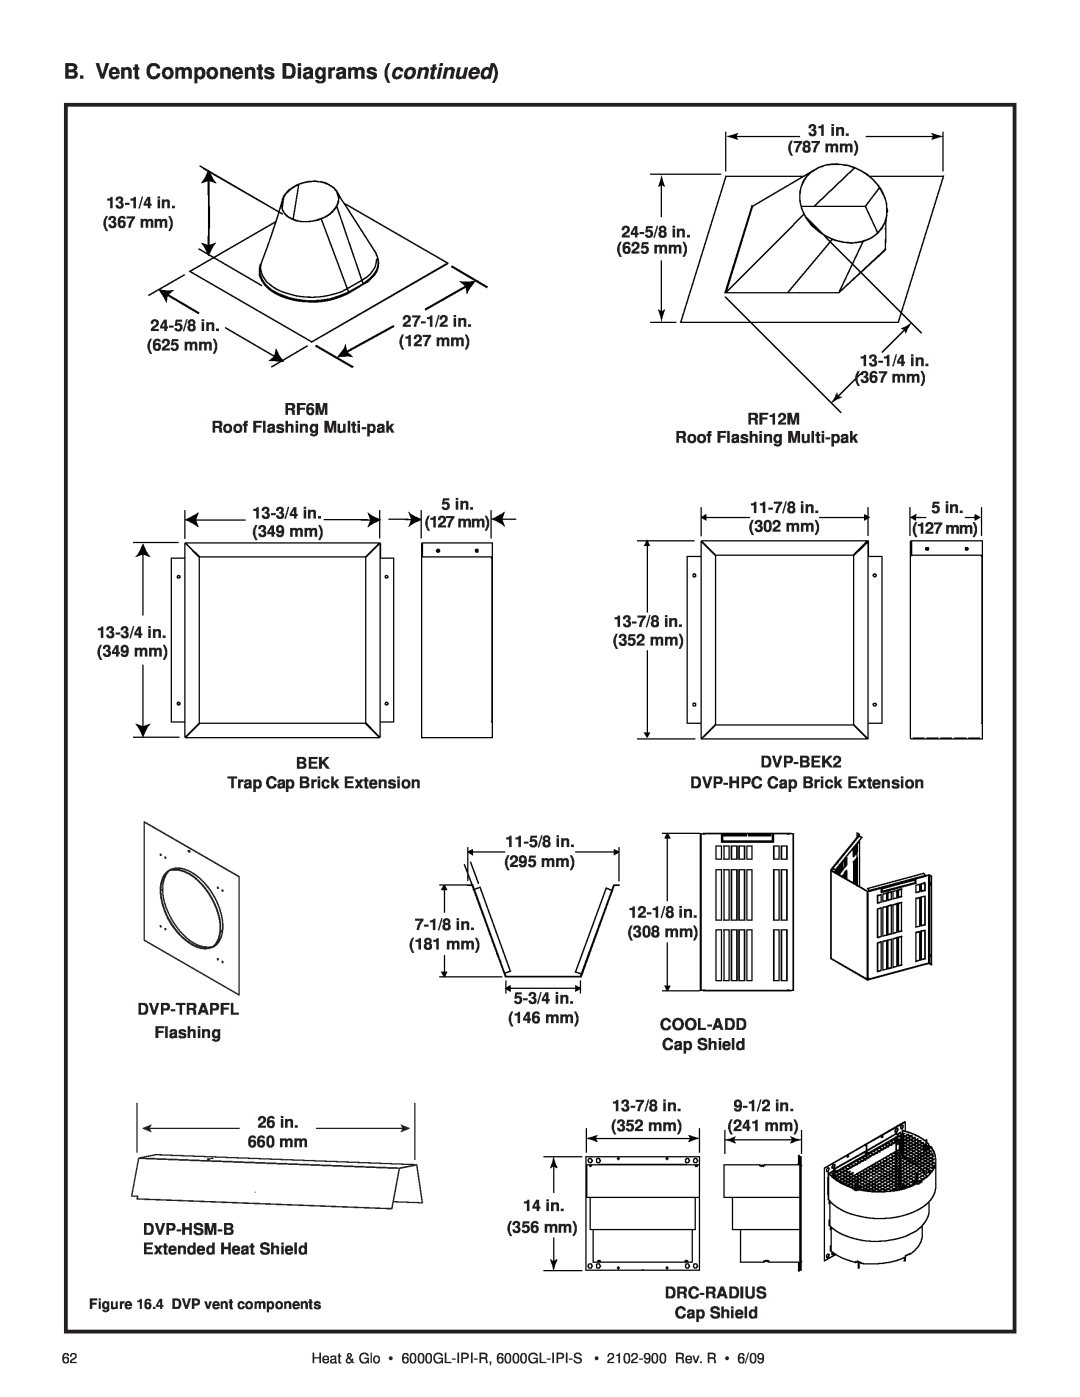 Heat & Glo LifeStyle 6000GL-IPILP-S B. Vent Components Diagrams continued, 31 in, 787 mm, 13-1/4in, 367 mm, 24-5/8in, RF6M 